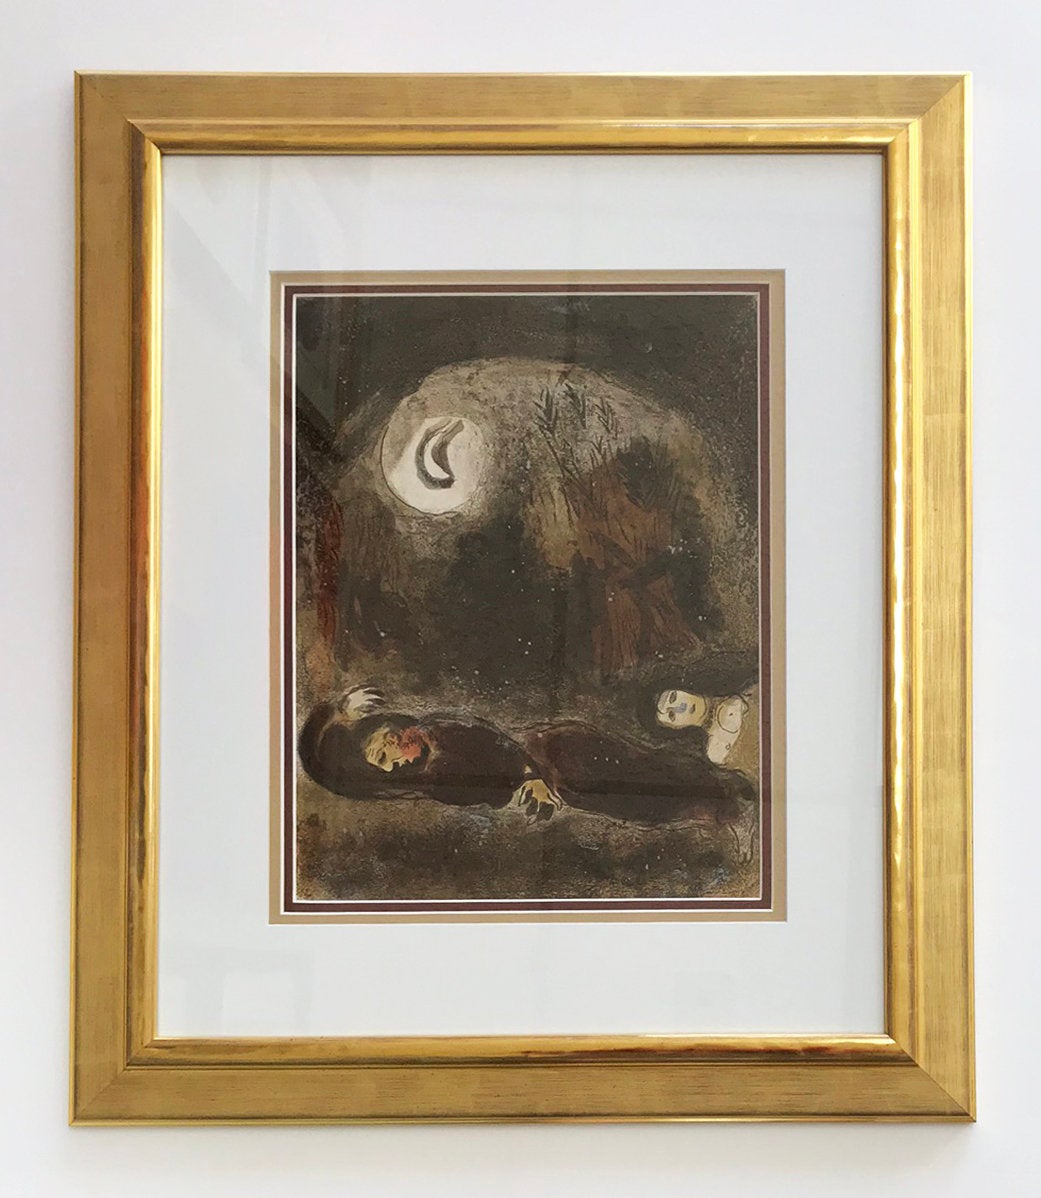 Marc Chagall, Original Lithograph 1960, Drawings for the Bible, Ruth aux pieds de Booz, Framed